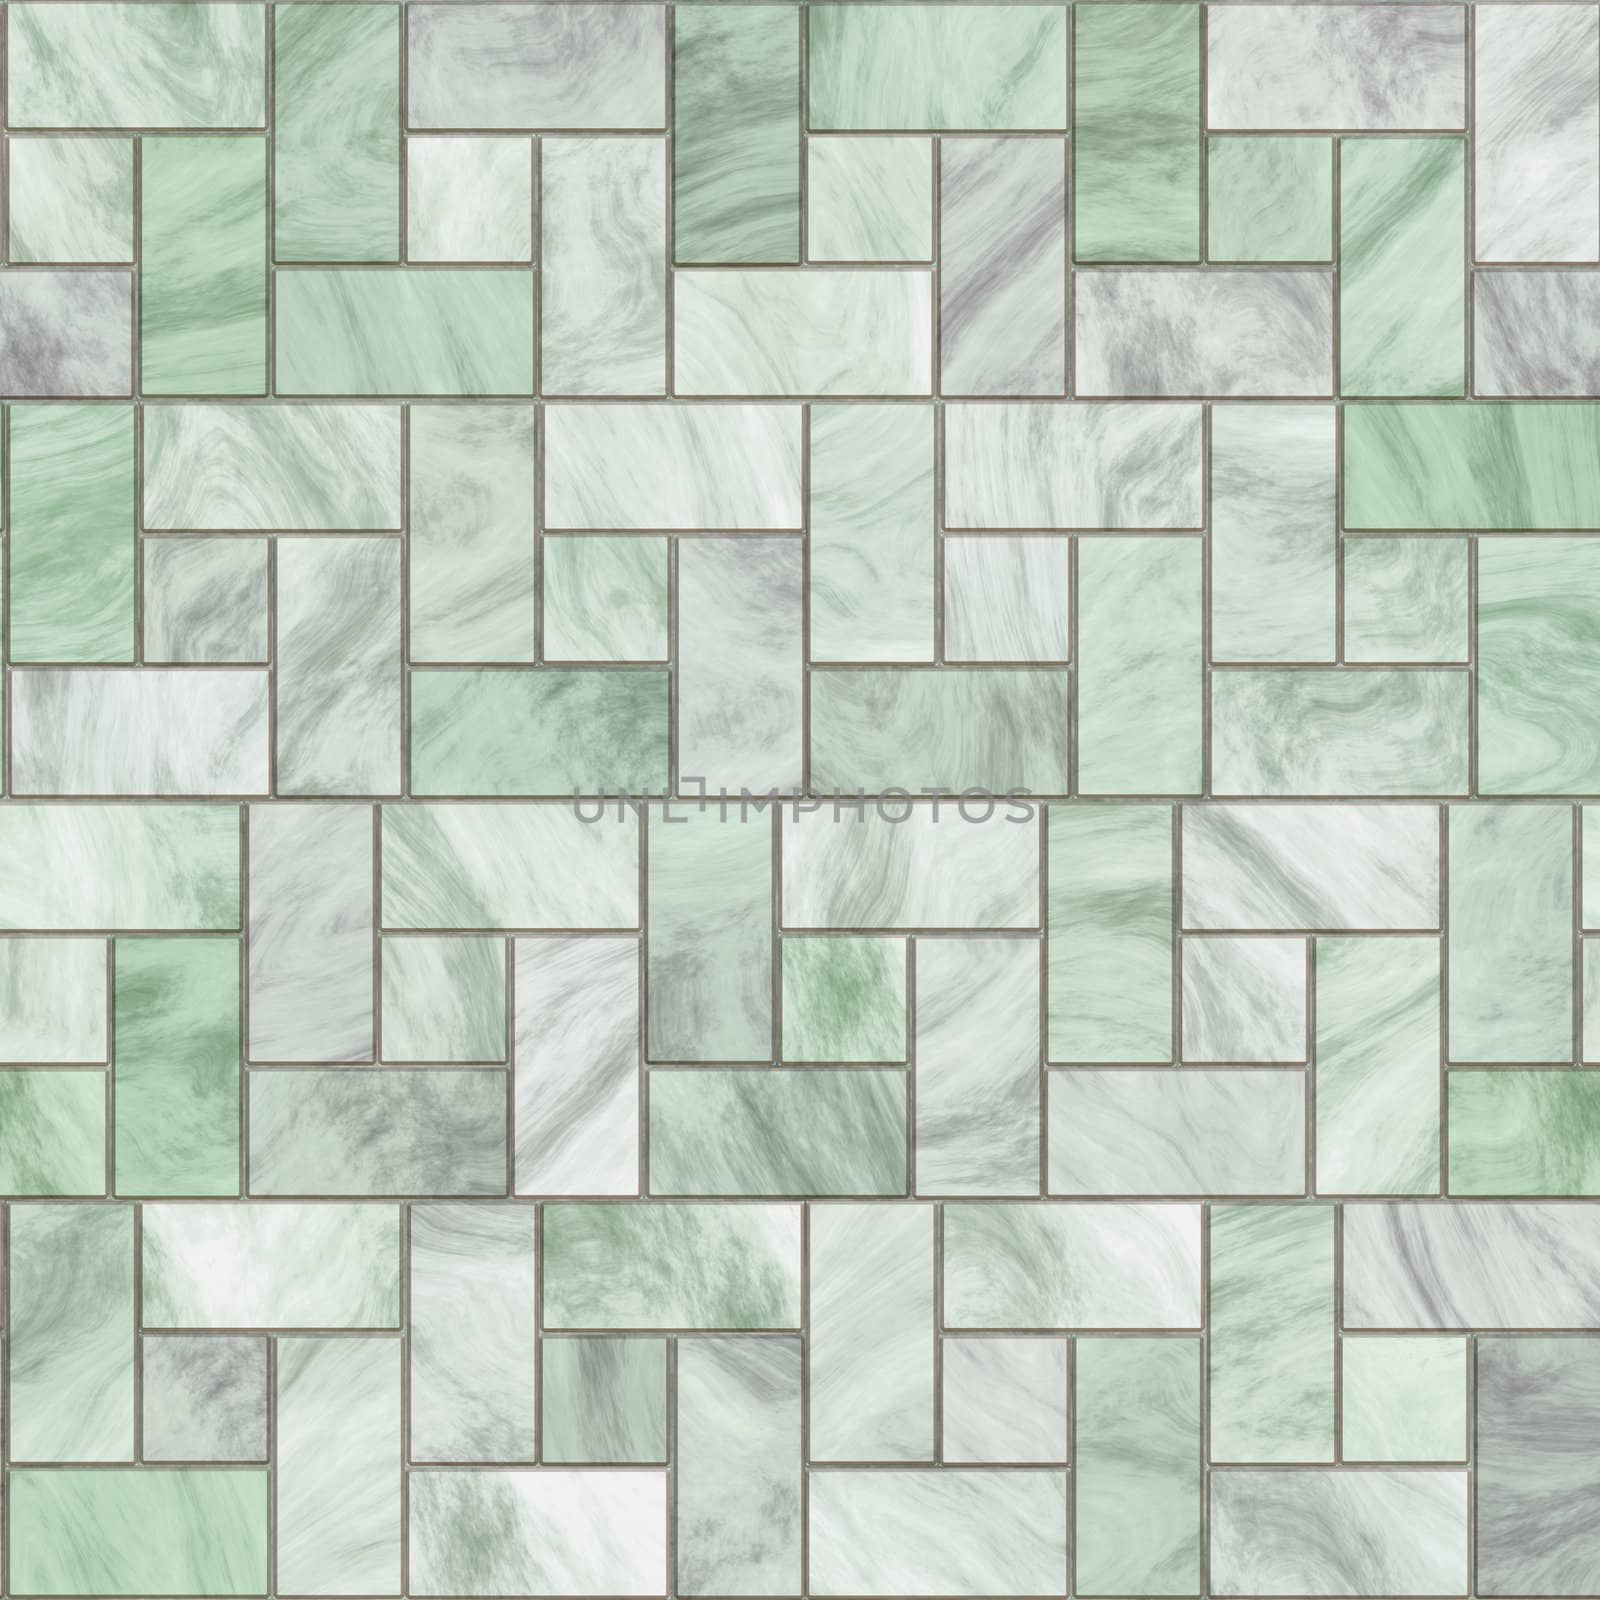 marble pavers or tiles by clearviewstock